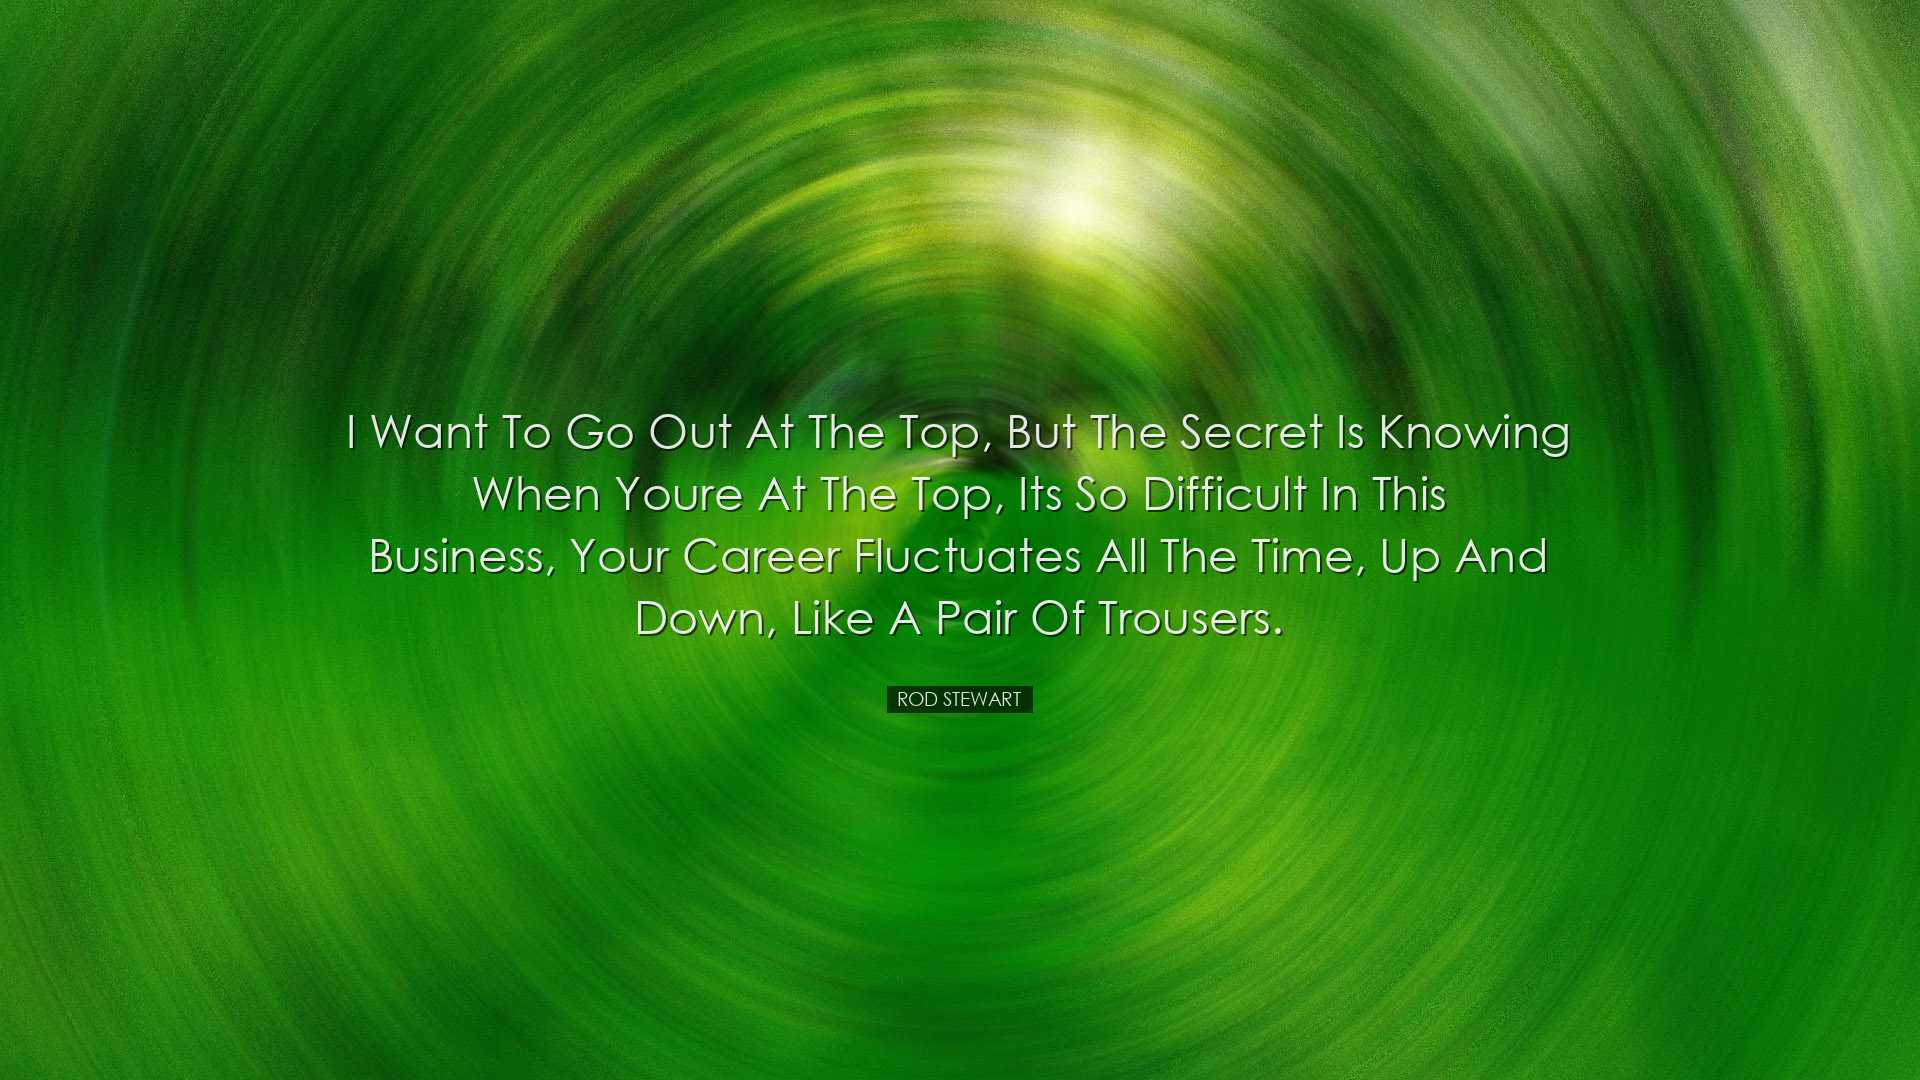 I want to go out at the top, but the secret is knowing when youre